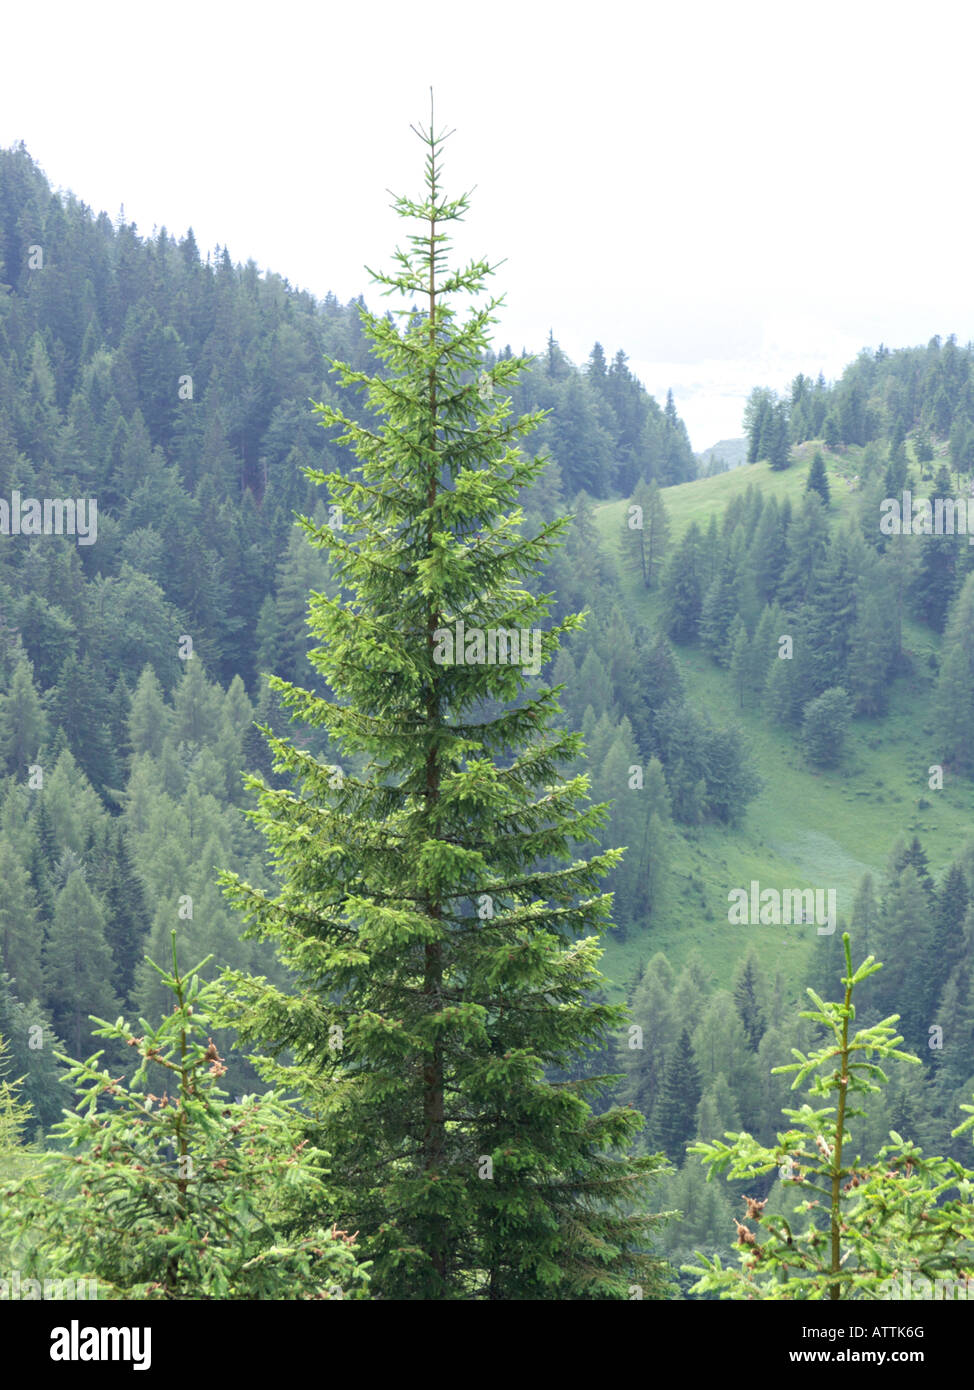 Common spruce (Picea abies) Stock Photo